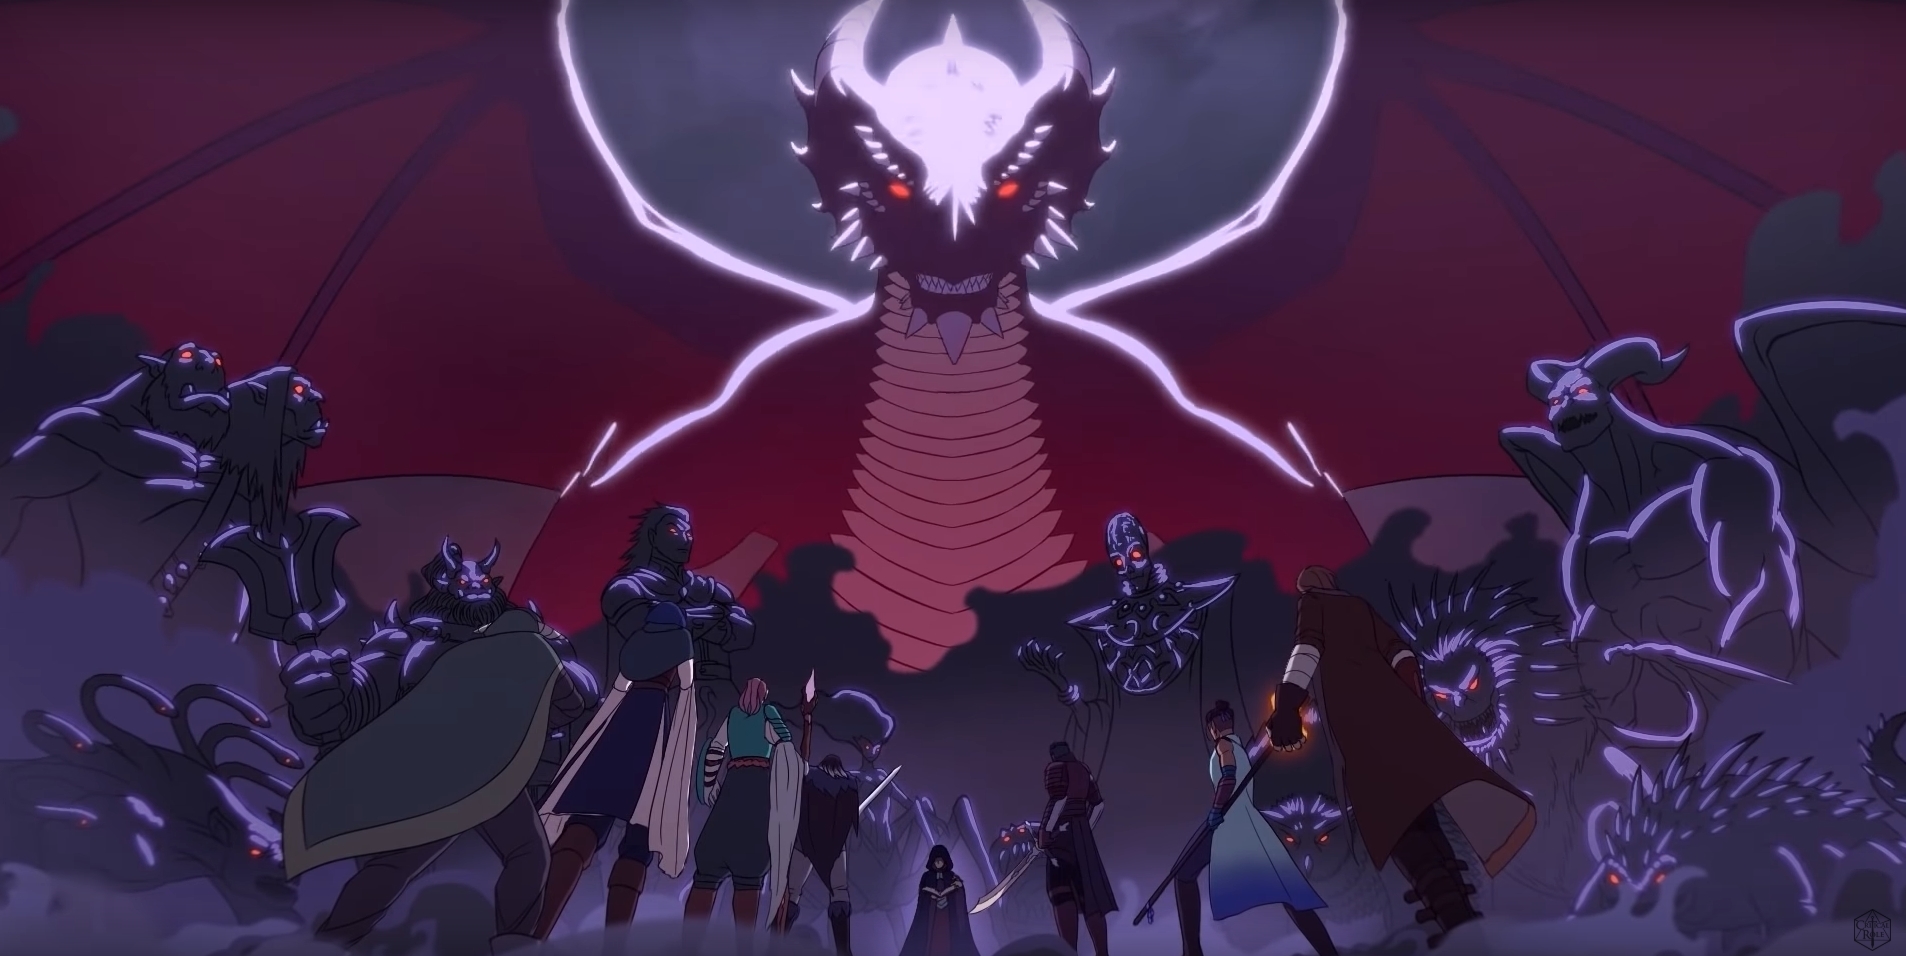 What Should Fans Expect from the Upcoming Wildemount Dungeons & Dragons Campaign Setting?